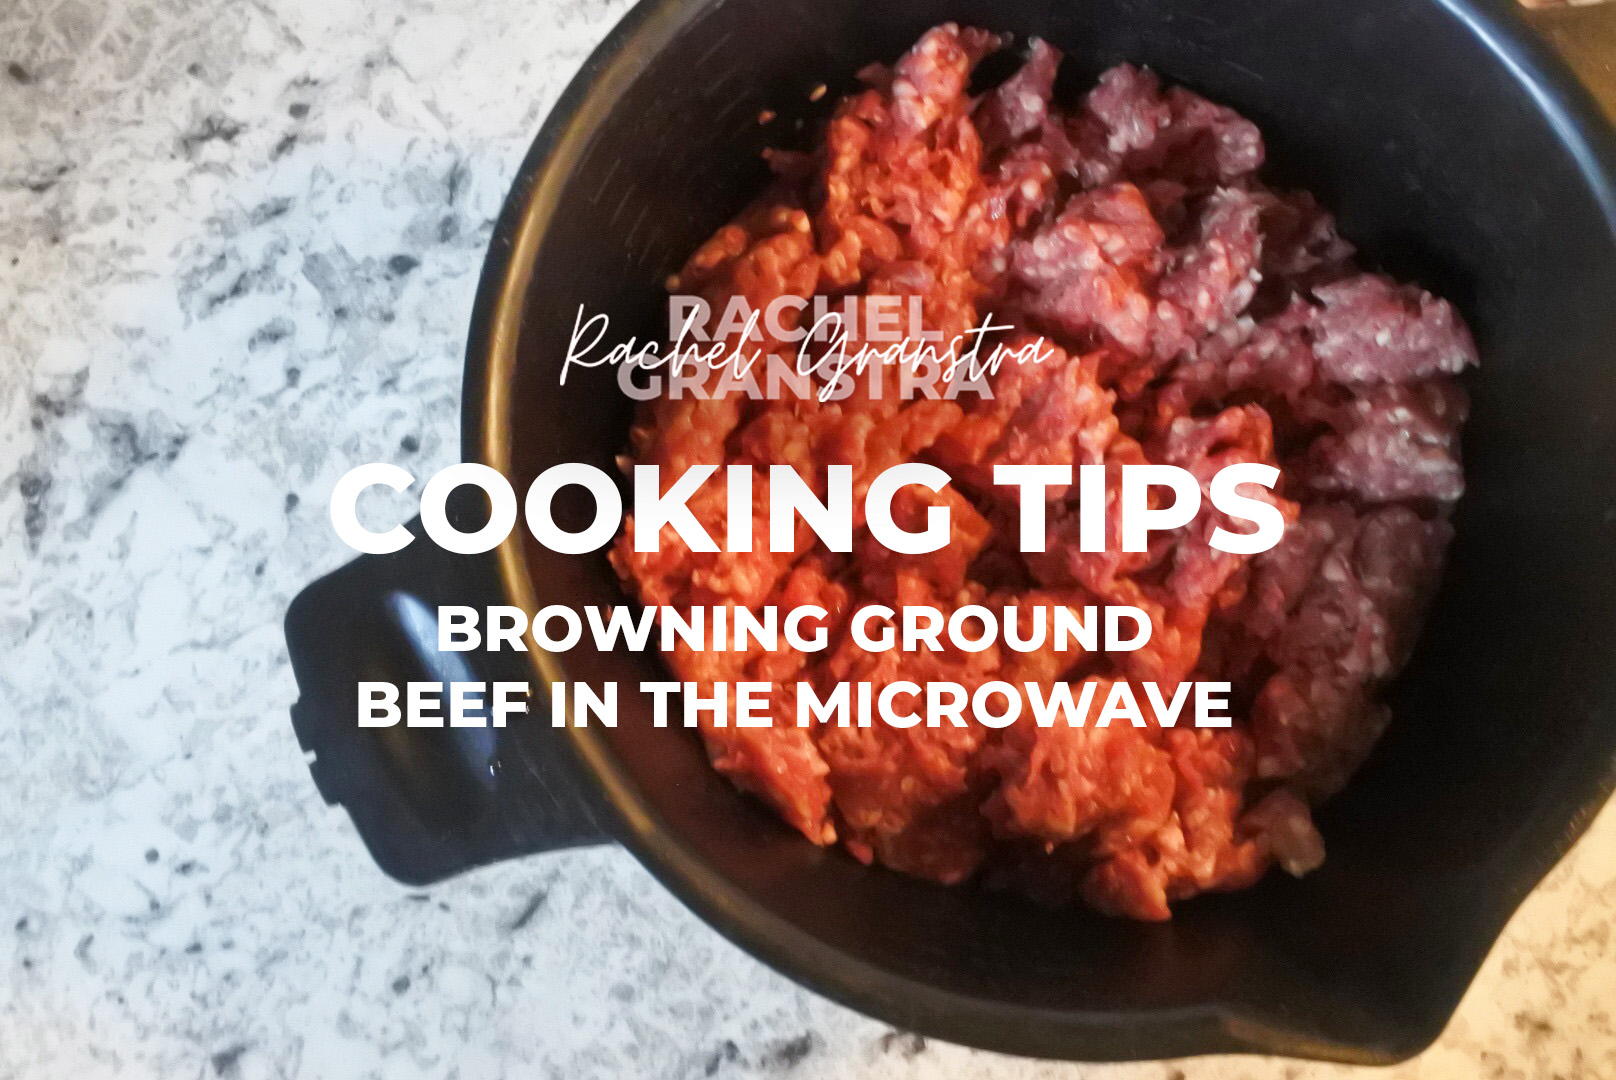 Cooking Tips: Browning Ground Beef in the Microwave